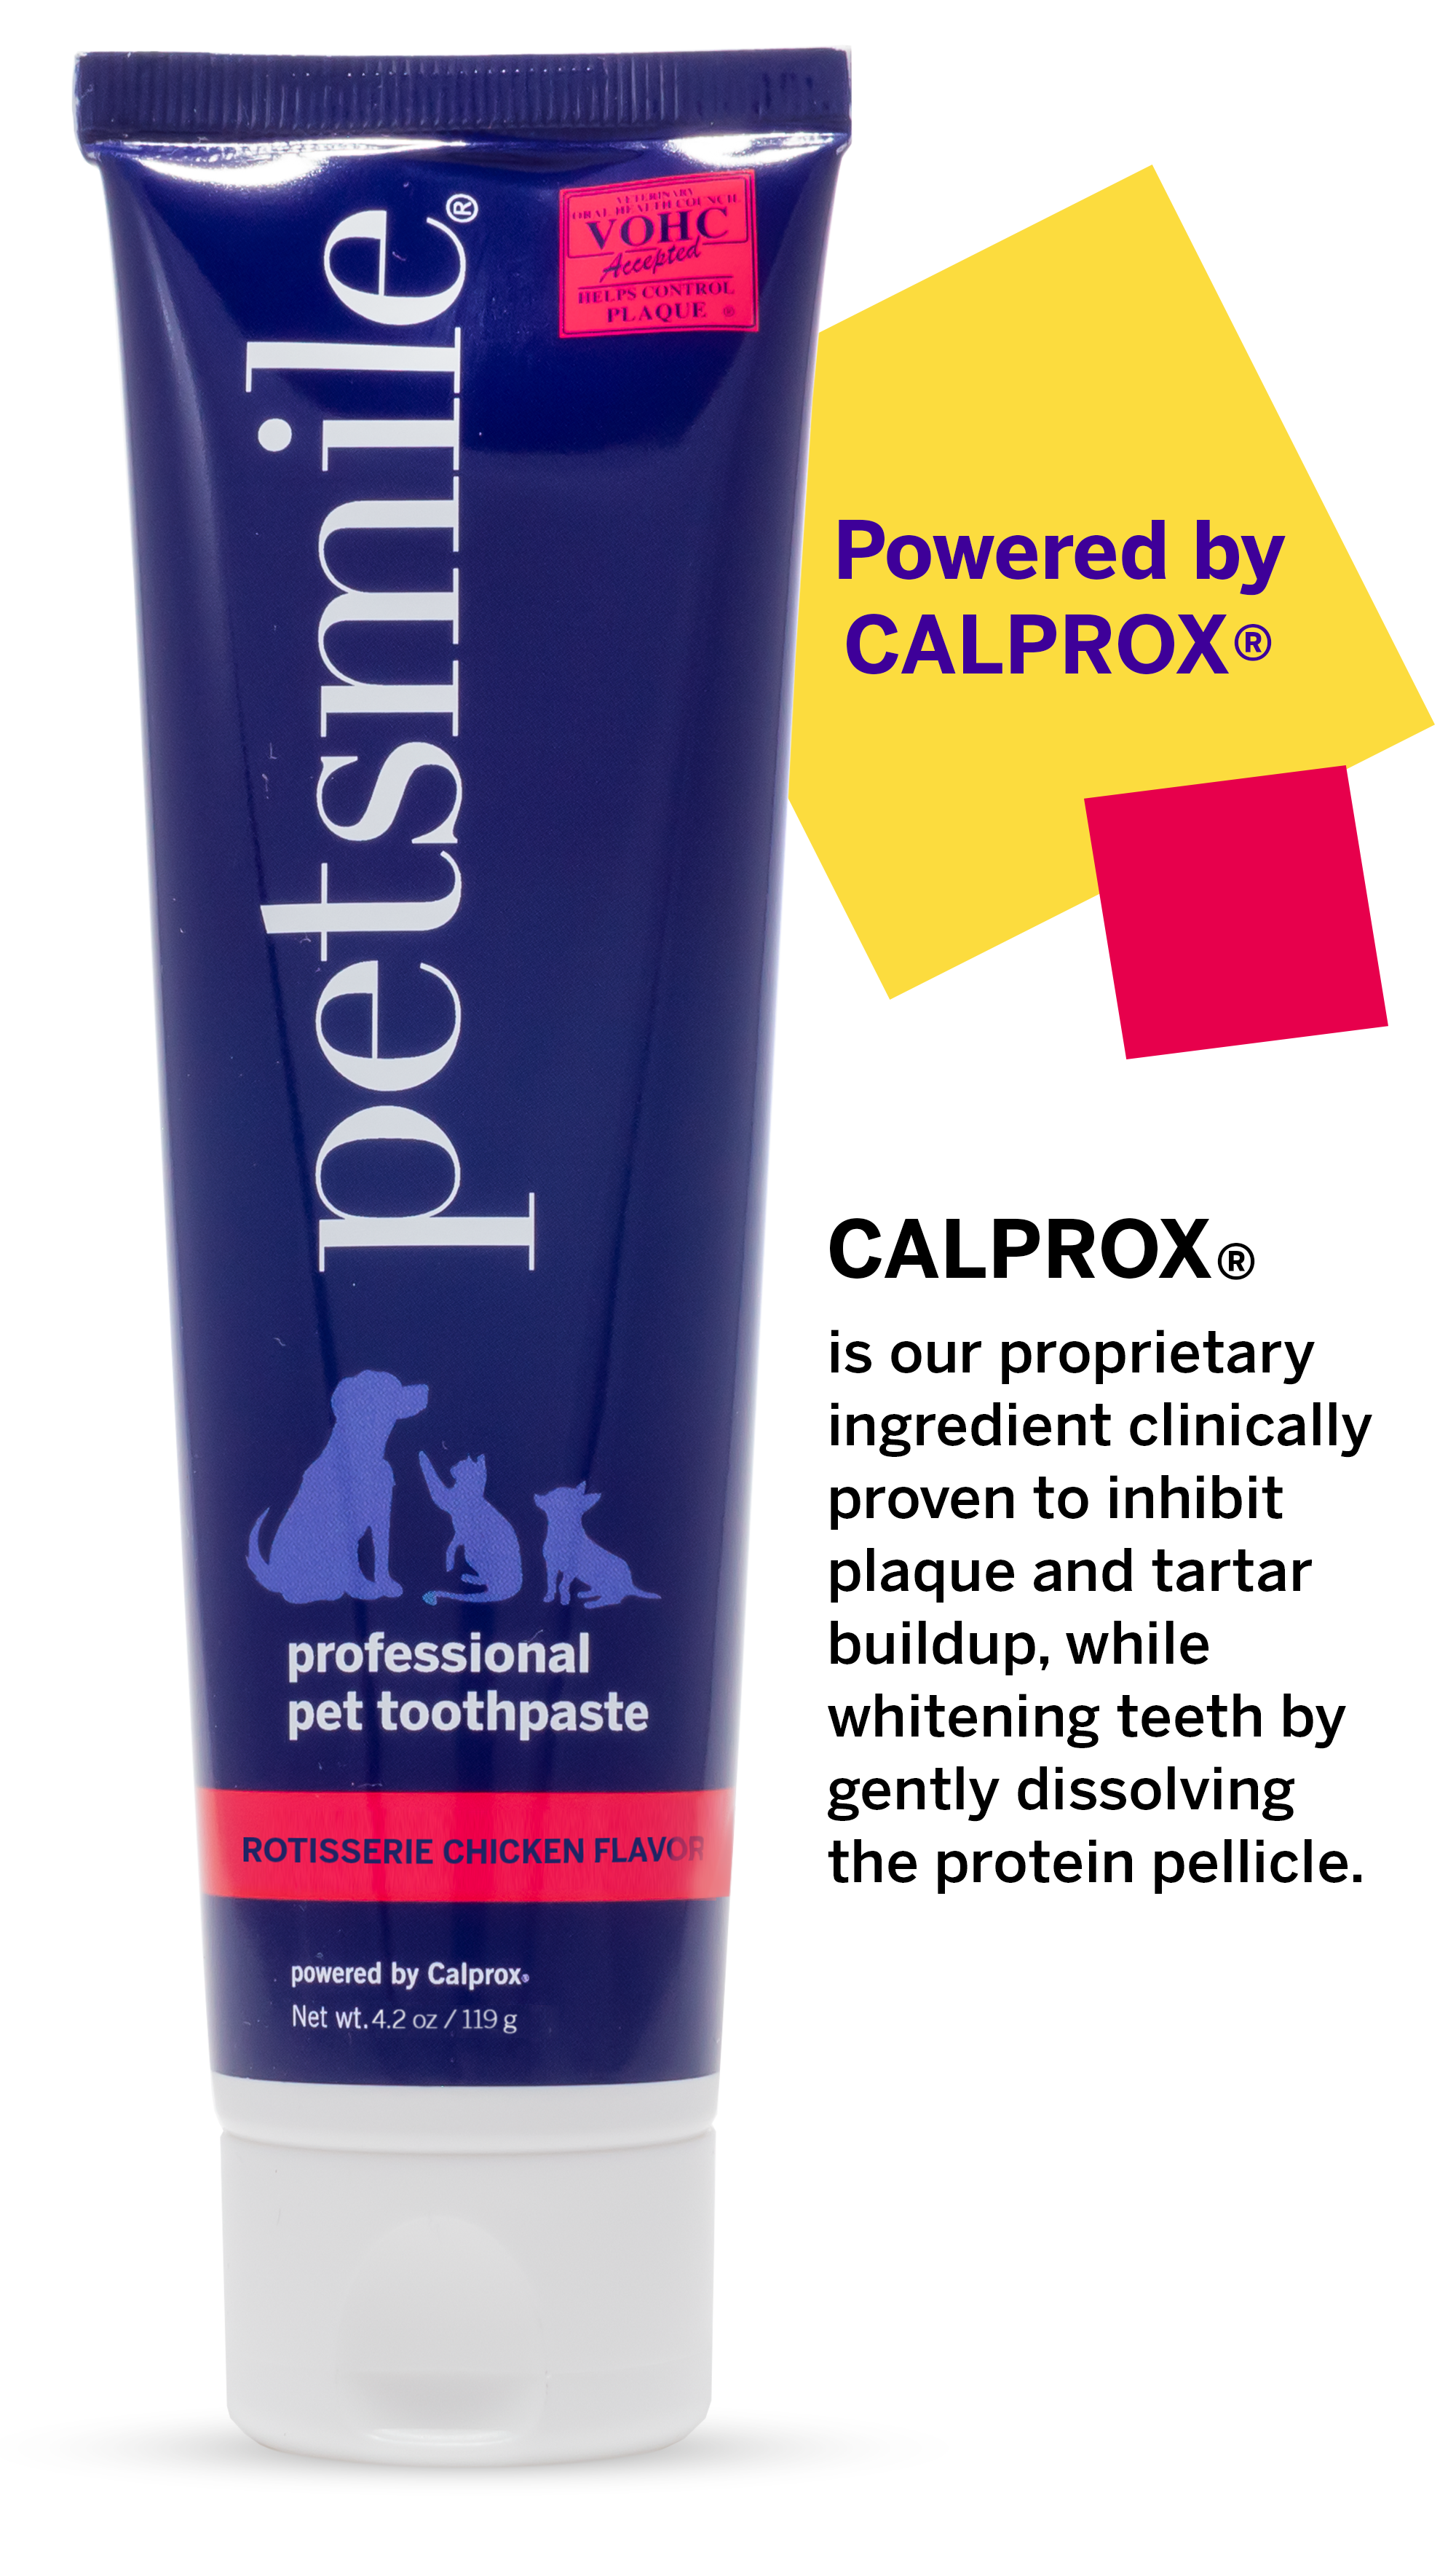 Large petsmile cat toothpaste with Calprox , Large puruple tube of chicken toothpaste , 4.2 OZ of petsmile professional cat toothpaste , Natural ingredients, Calprox powered , Clinically proven, Rotisserie Chicken Flavor  , Large tube, BPA-free, fresh breath